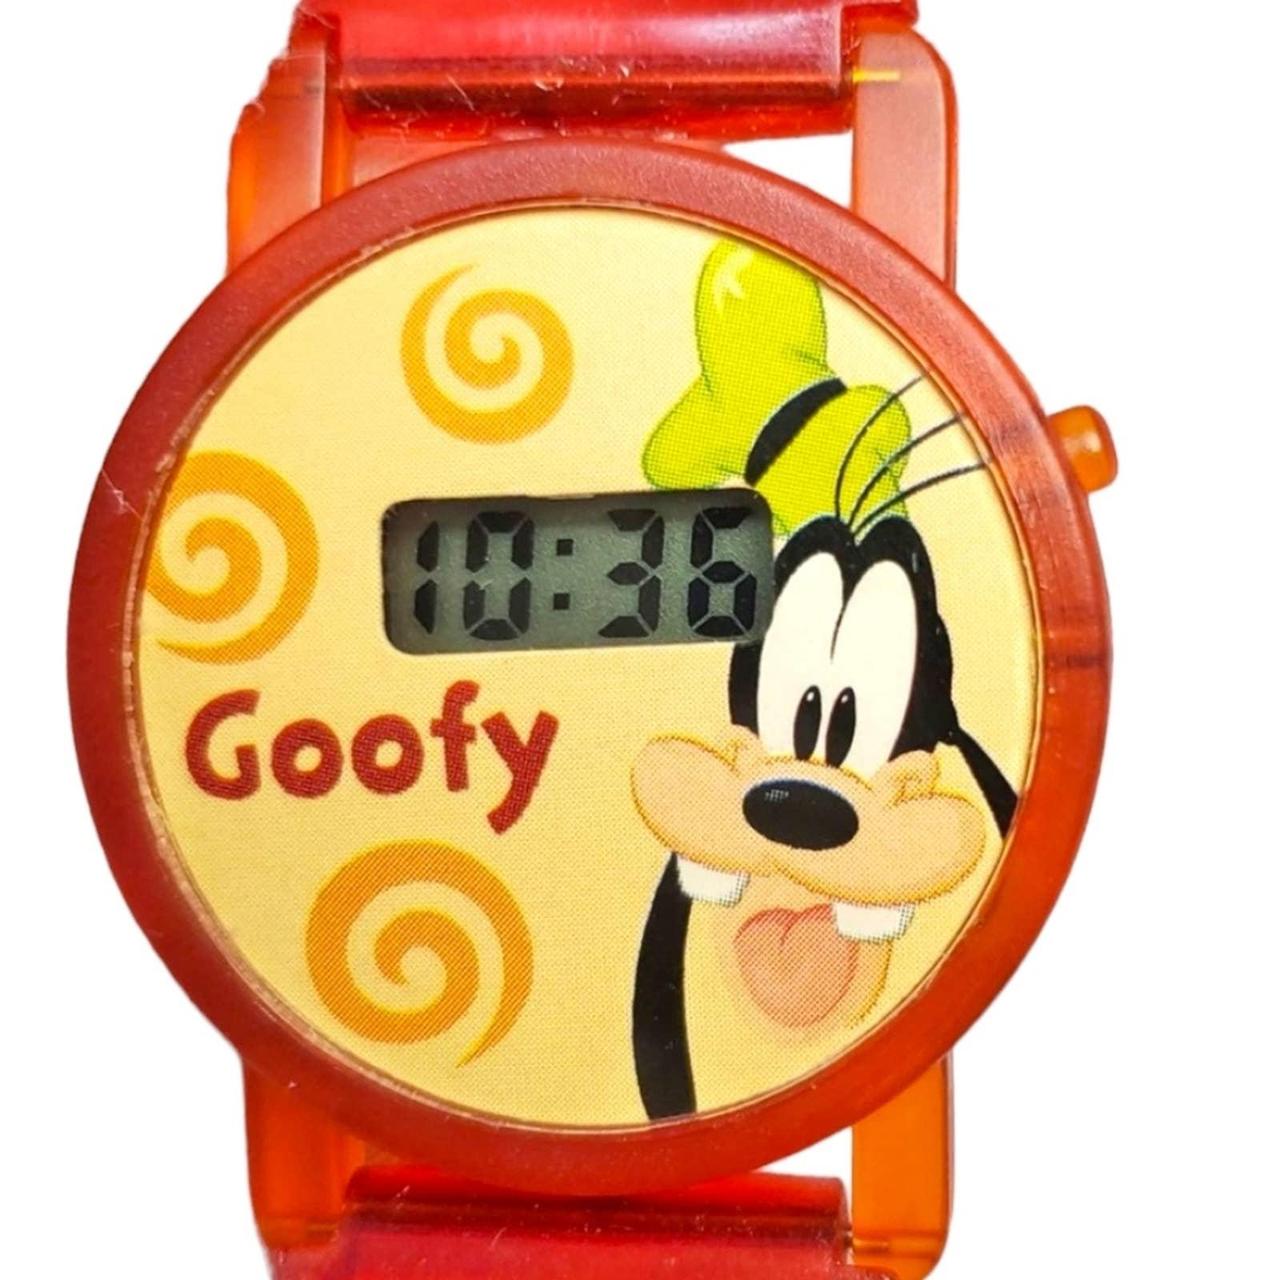 Goofy Watch by Lorus Disney Character Watch Movement Japan as is Watch  Goofy's Gloved Hands Are the Watches Hands Stainless Steel Back - Etsy |  Vintage fashion, Vintage outfits, Watch movement